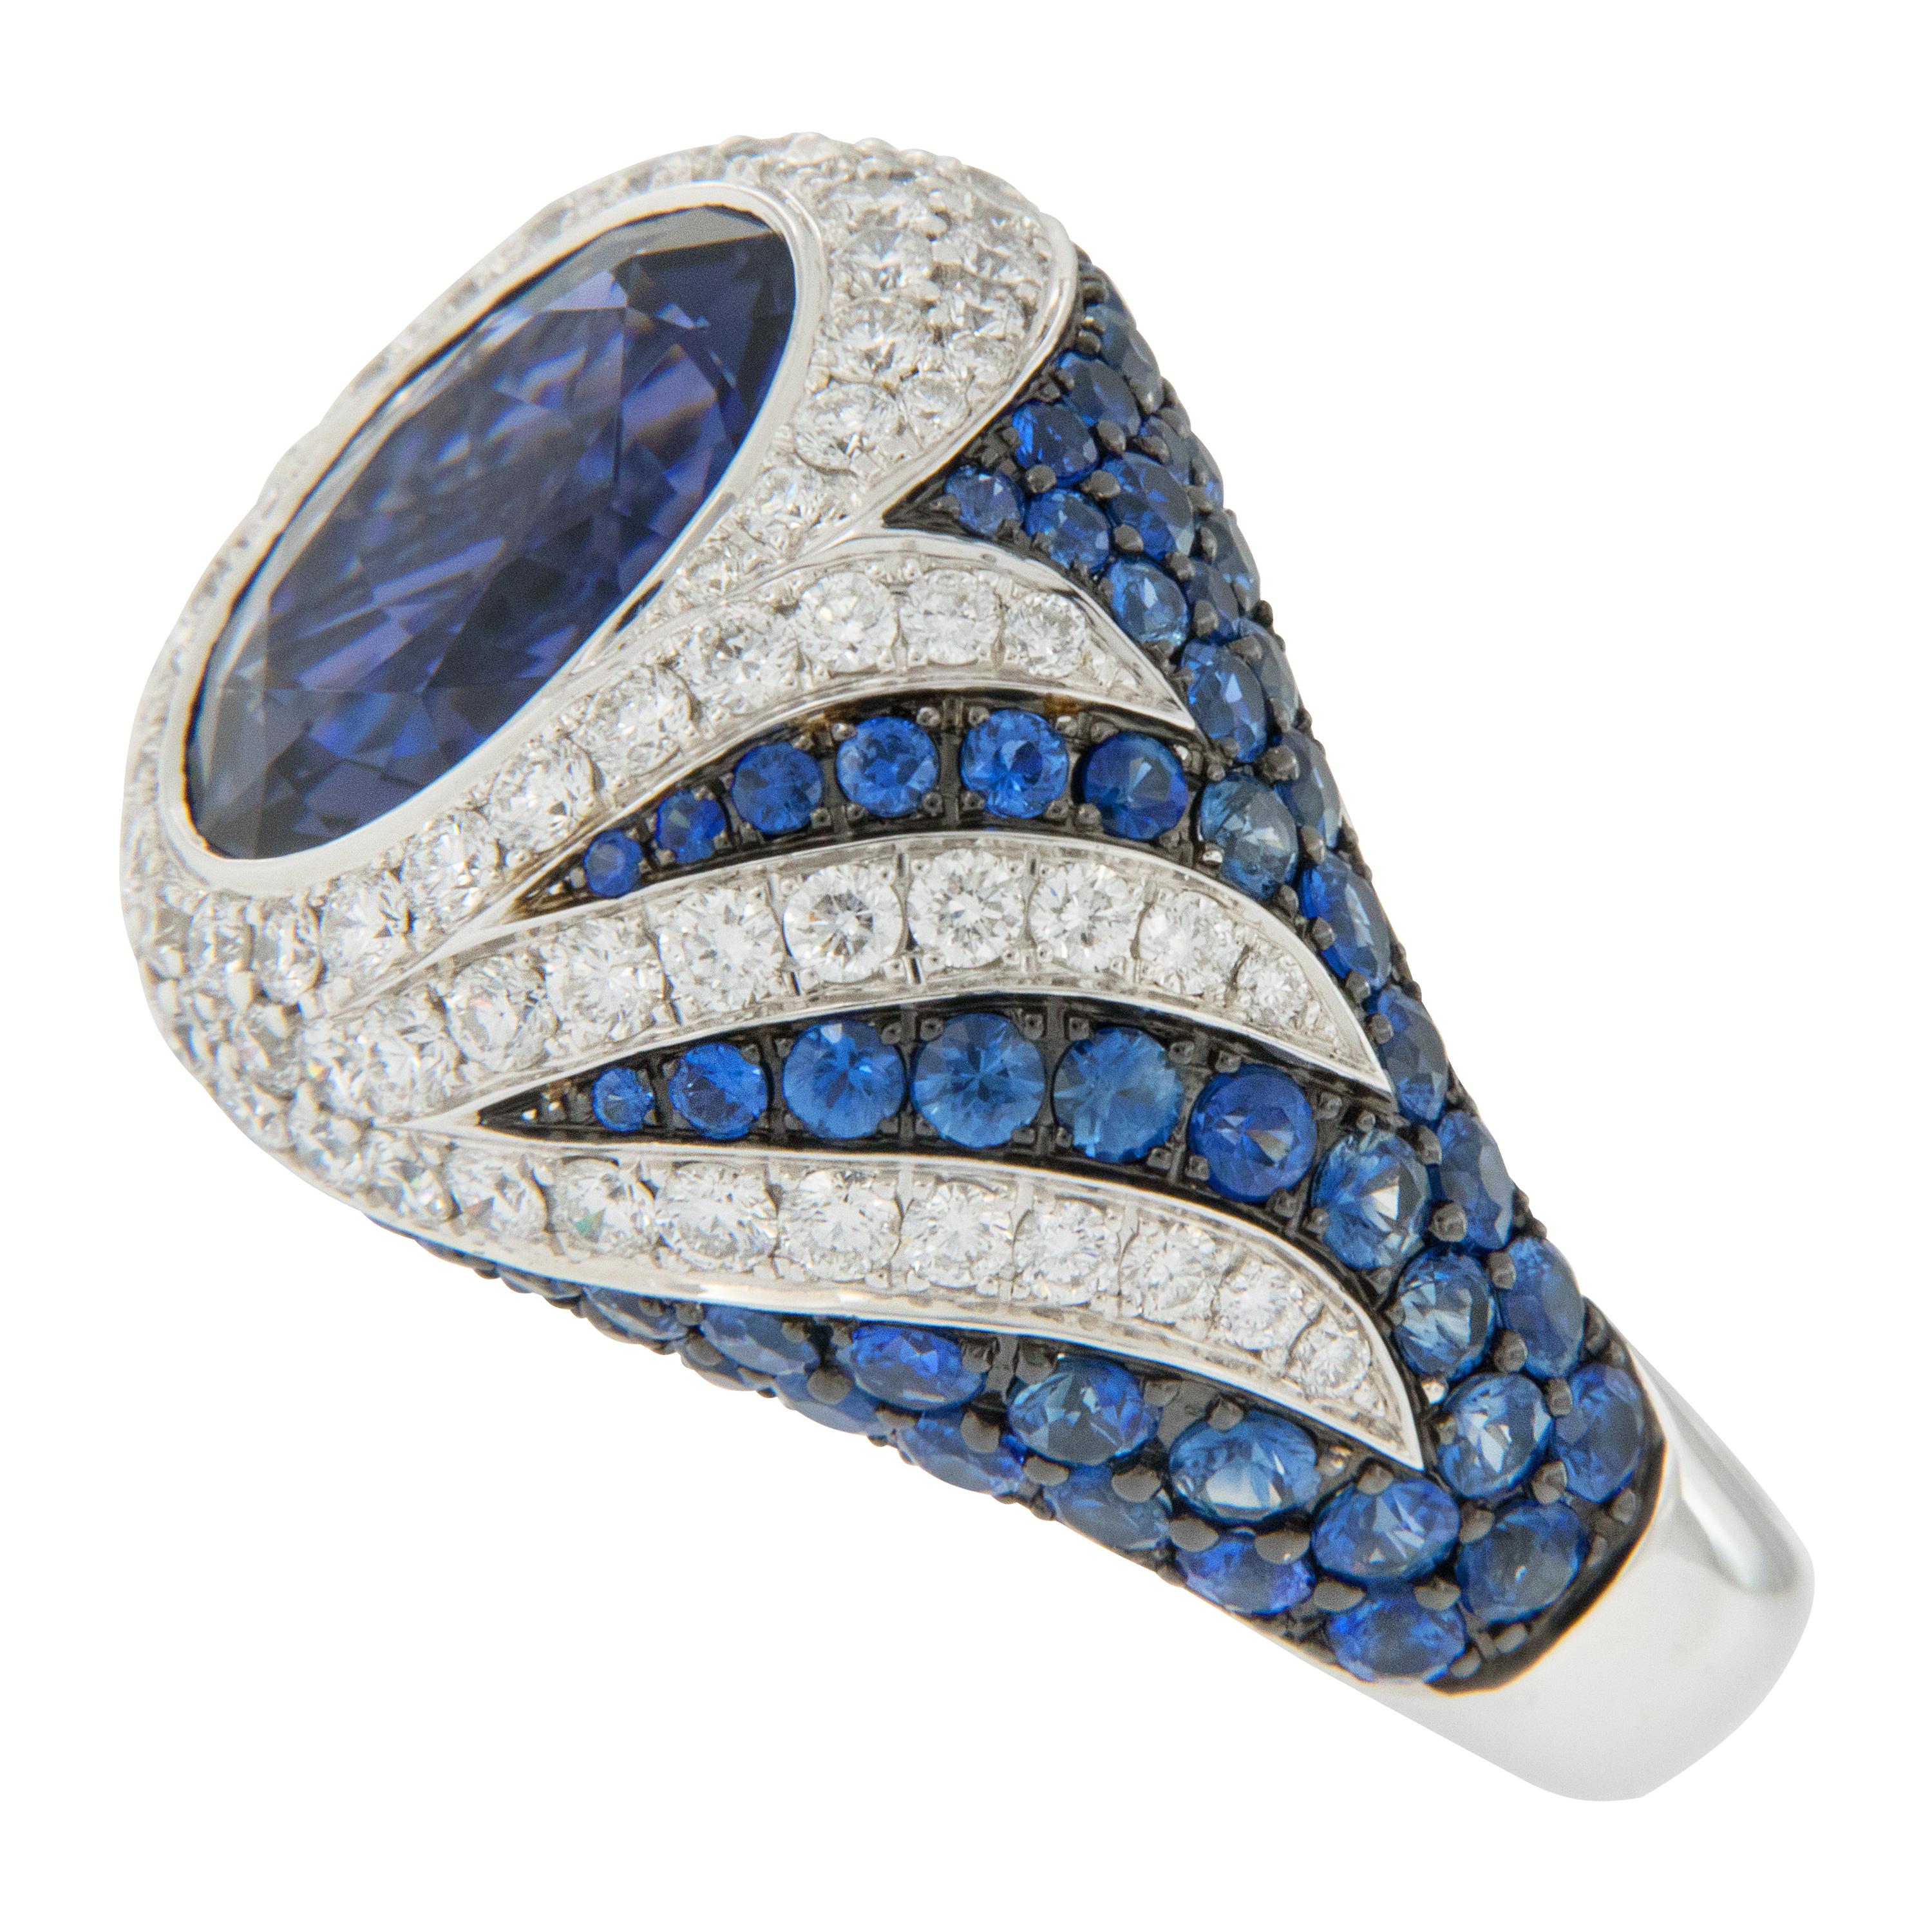 The name Iolite comes from the Greek word ios, meaning “violet.”  It is often cited as the twenty-first wedding anniversary gemstone. Crafted in 18 karat white gold with a swirl design, this ring features an oval fine Iolite accented with 1.44 Cttw